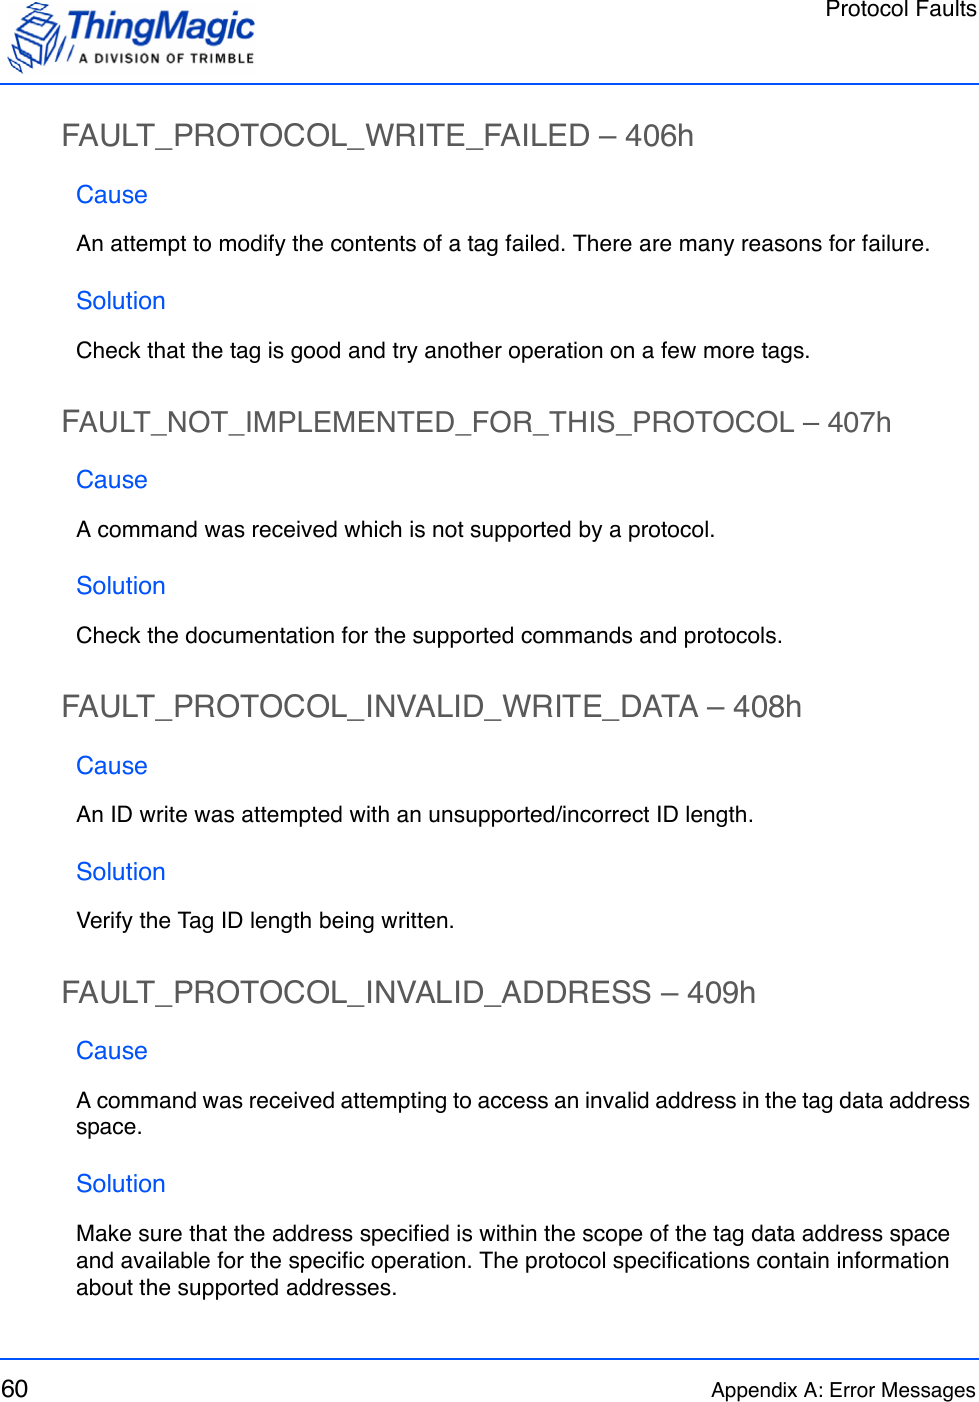 Protocol Faults60 Appendix A: Error MessagesFAULT_PROTOCOL_WRITE_FAILED – 406hCauseAn attempt to modify the contents of a tag failed. There are many reasons for failure.SolutionCheck that the tag is good and try another operation on a few more tags.FAULT_NOT_IMPLEMENTED_FOR_THIS_PROTOCOL – 407hCauseA command was received which is not supported by a protocol.SolutionCheck the documentation for the supported commands and protocols.FAULT_PROTOCOL_INVALID_WRITE_DATA – 408hCauseAn ID write was attempted with an unsupported/incorrect ID length.SolutionVerify the Tag ID length being written.FAULT_PROTOCOL_INVALID_ADDRESS – 409hCauseA command was received attempting to access an invalid address in the tag data address space. SolutionMake sure that the address specified is within the scope of the tag data address space and available for the specific operation. The protocol specifications contain information about the supported addresses.